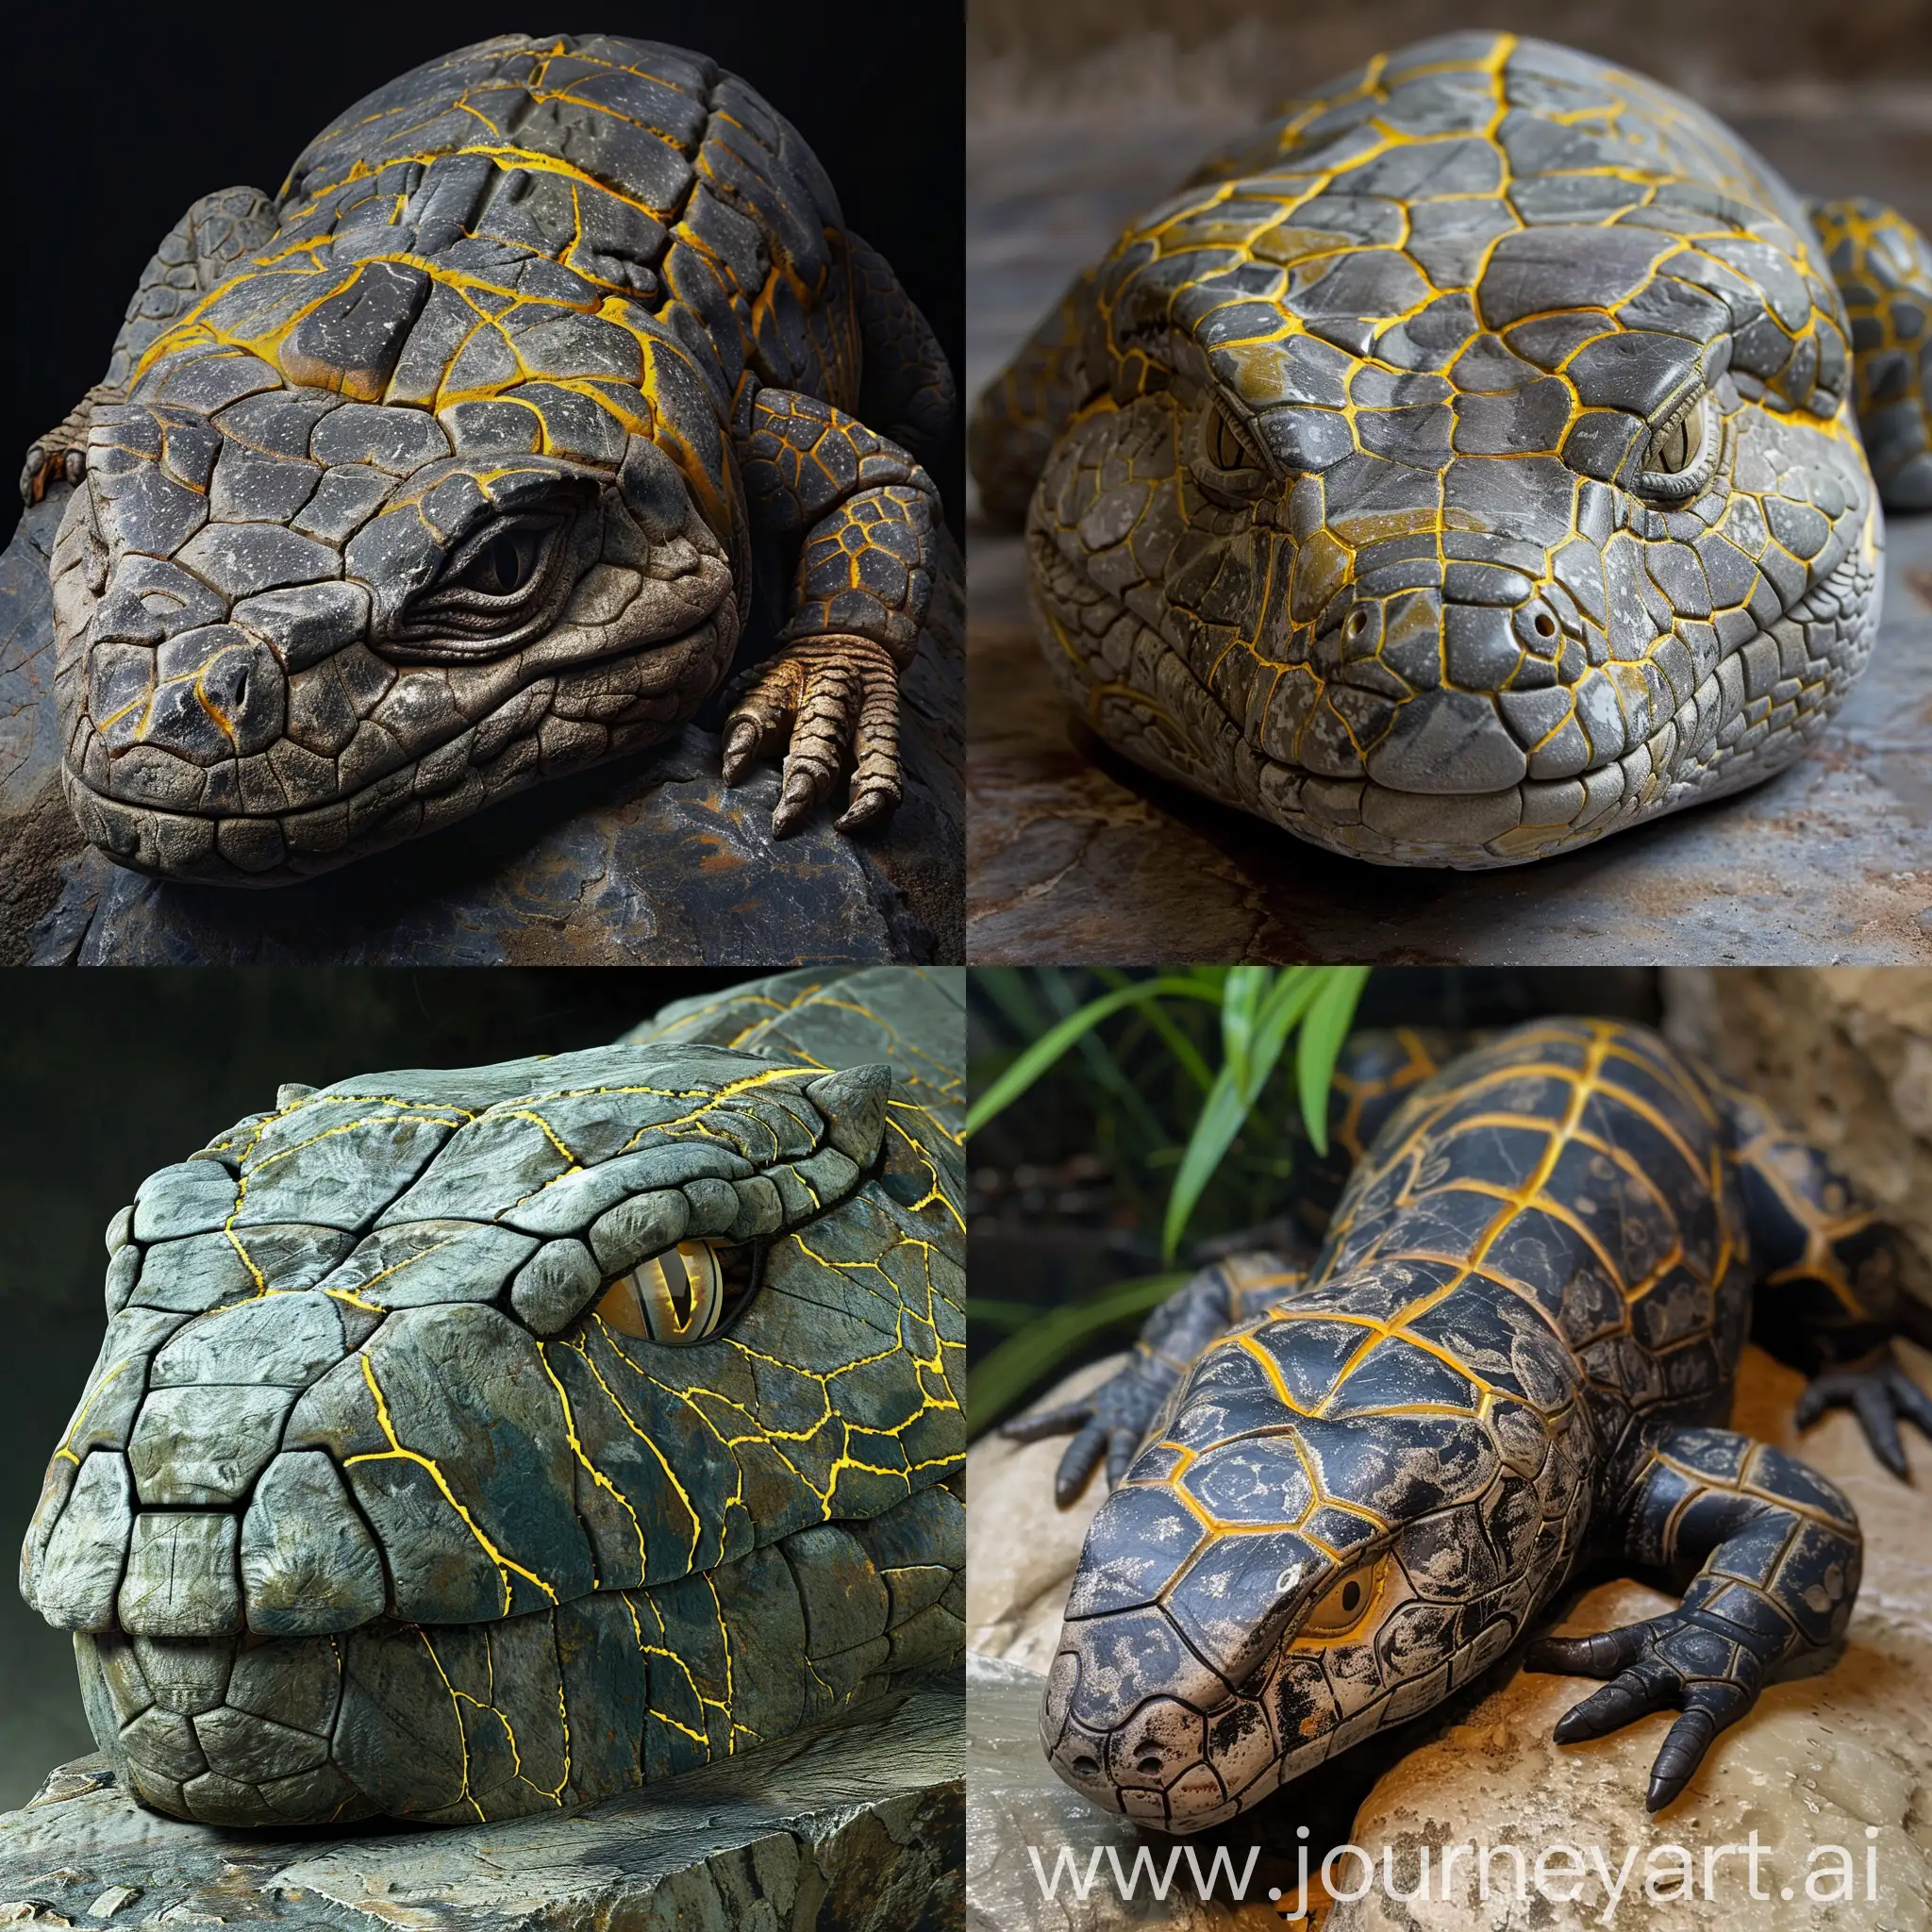 Majestic-Stone-Reptile-Sculpture-with-Intricate-Yellow-Veins